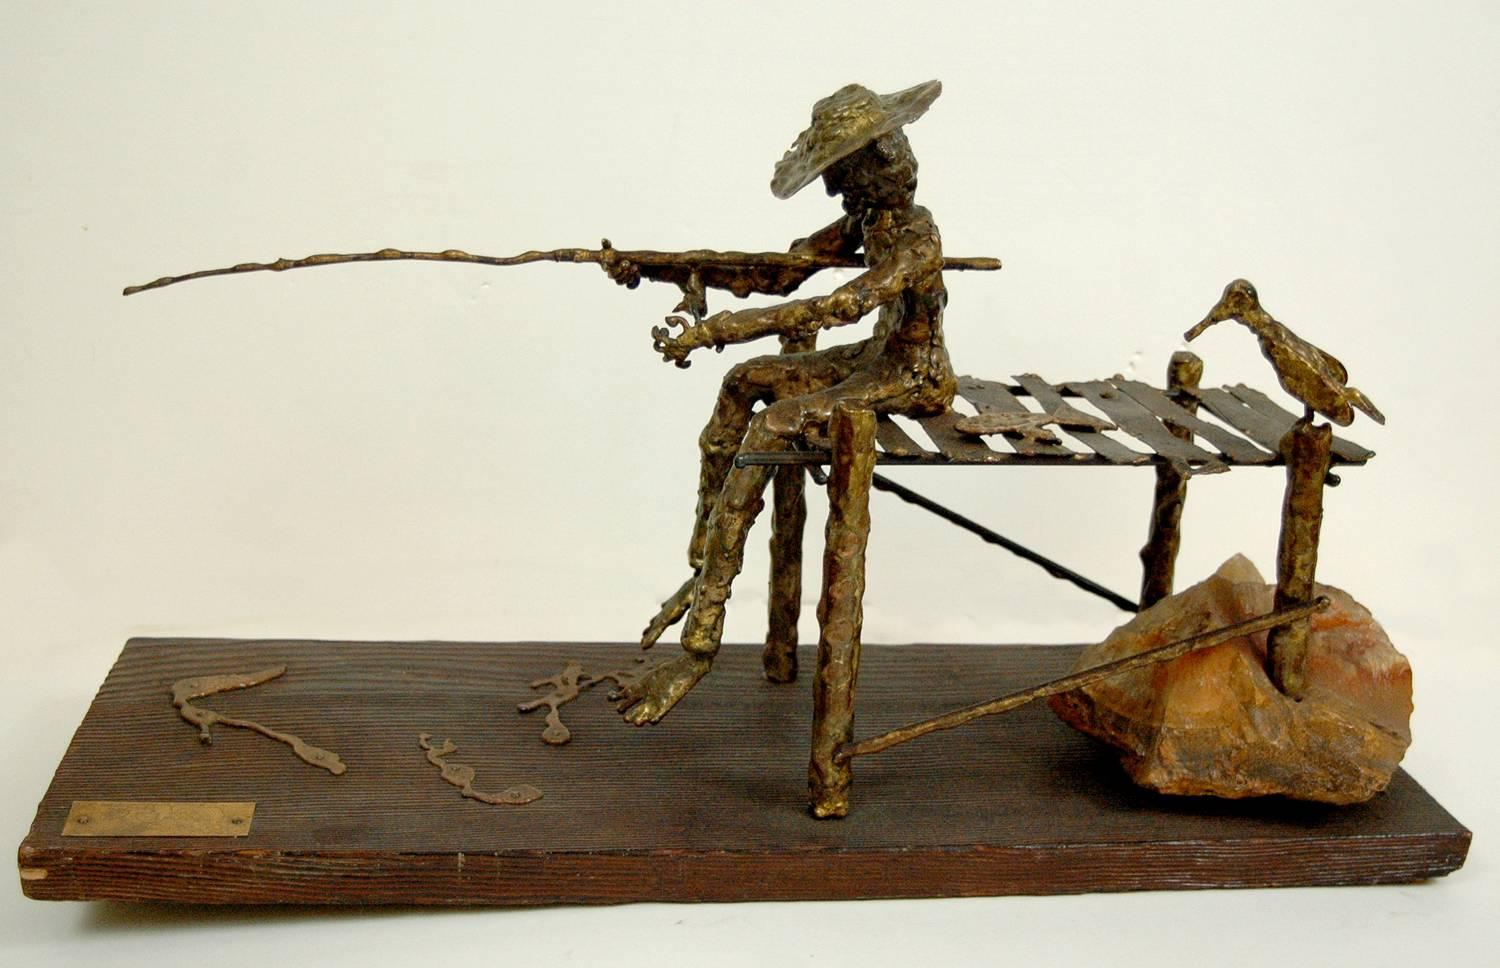 Unknown Figurative Sculpture - signed illegibly; Fisherman and Bird; bronze, wood, rock